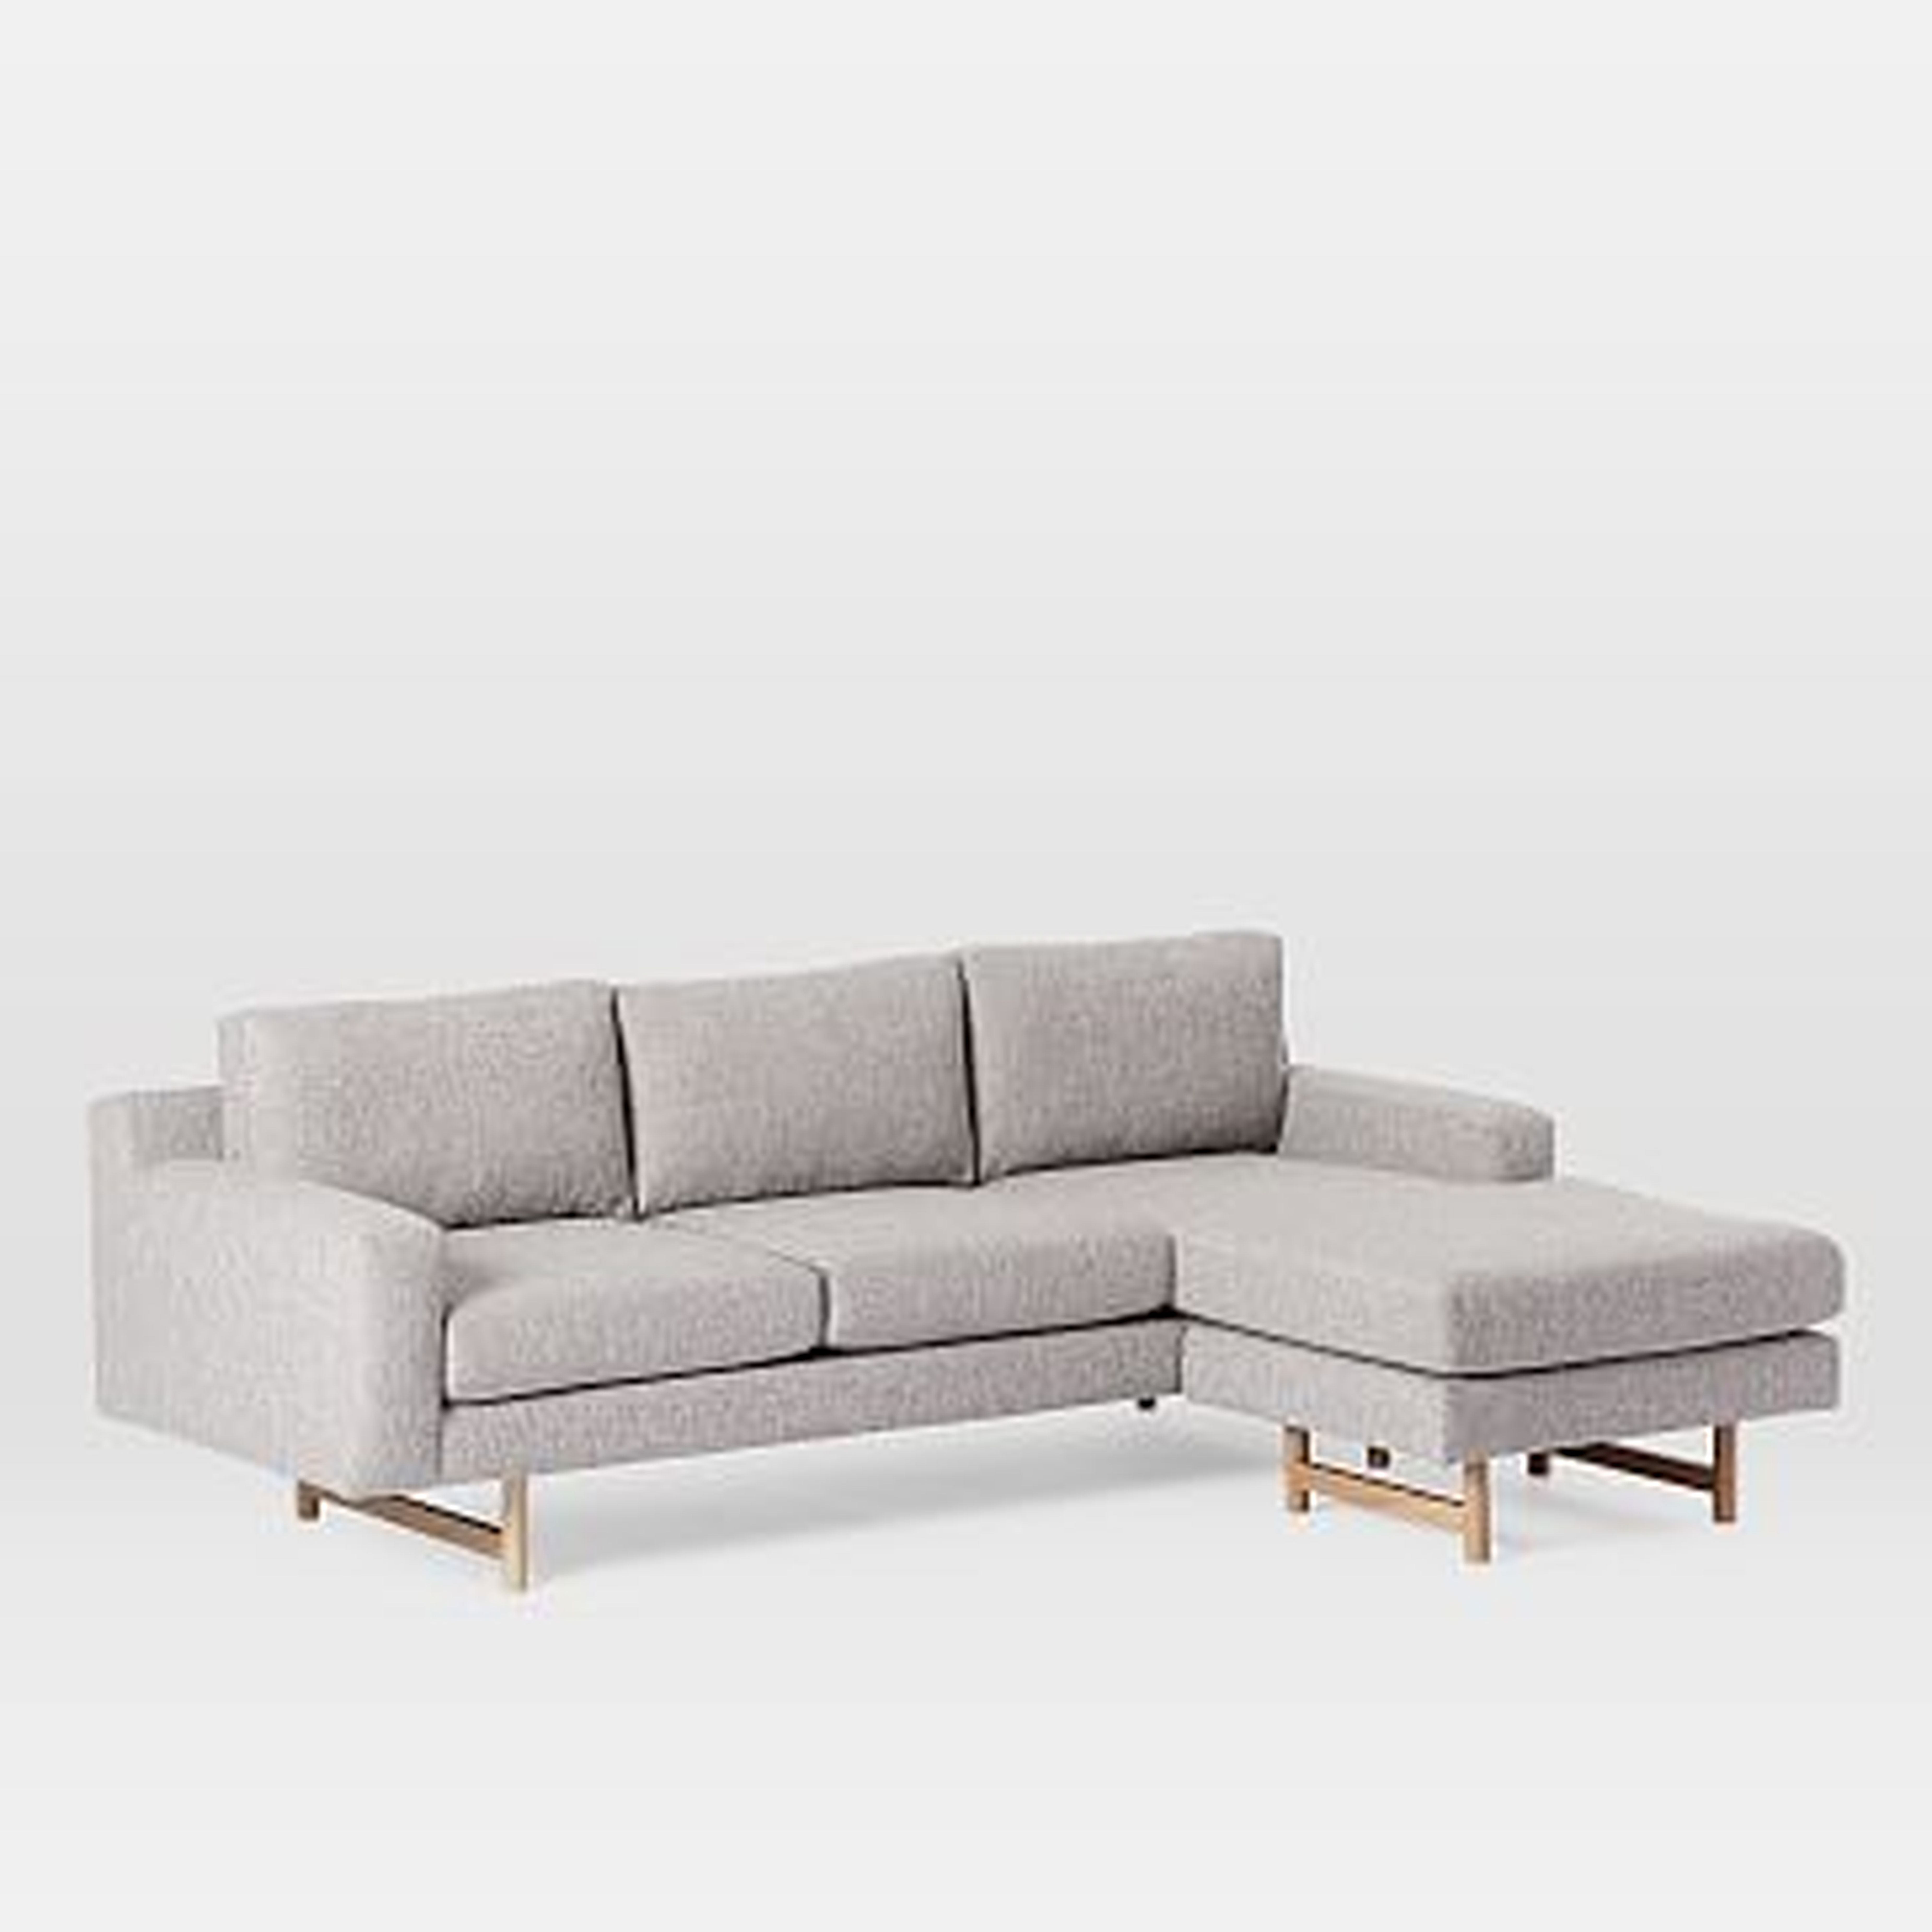 Eddy 3 Seater Flip Sectional, Deco Weave, Feather Gray - West Elm